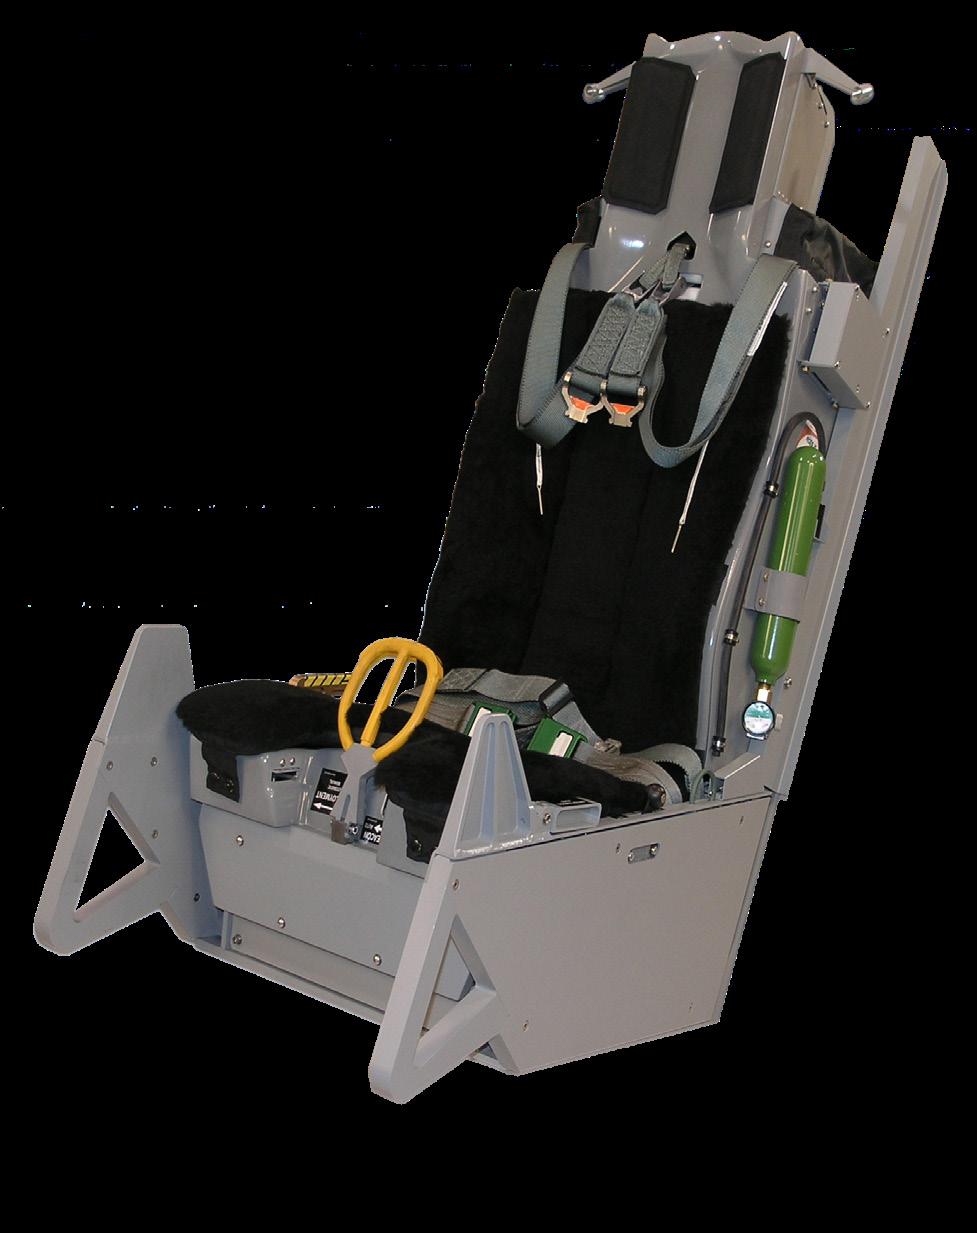 Full Fidelity LOOKS, FEELS, & FUNCTIONS LIKE THE ACTUAL EJECTION SEAT TRUE Q MOTION SEATS ARE HIGH FIDELITY REPLICATIONS OF THE ACTUAL EJECTION SEAT WITH ALL-ELECTRIC